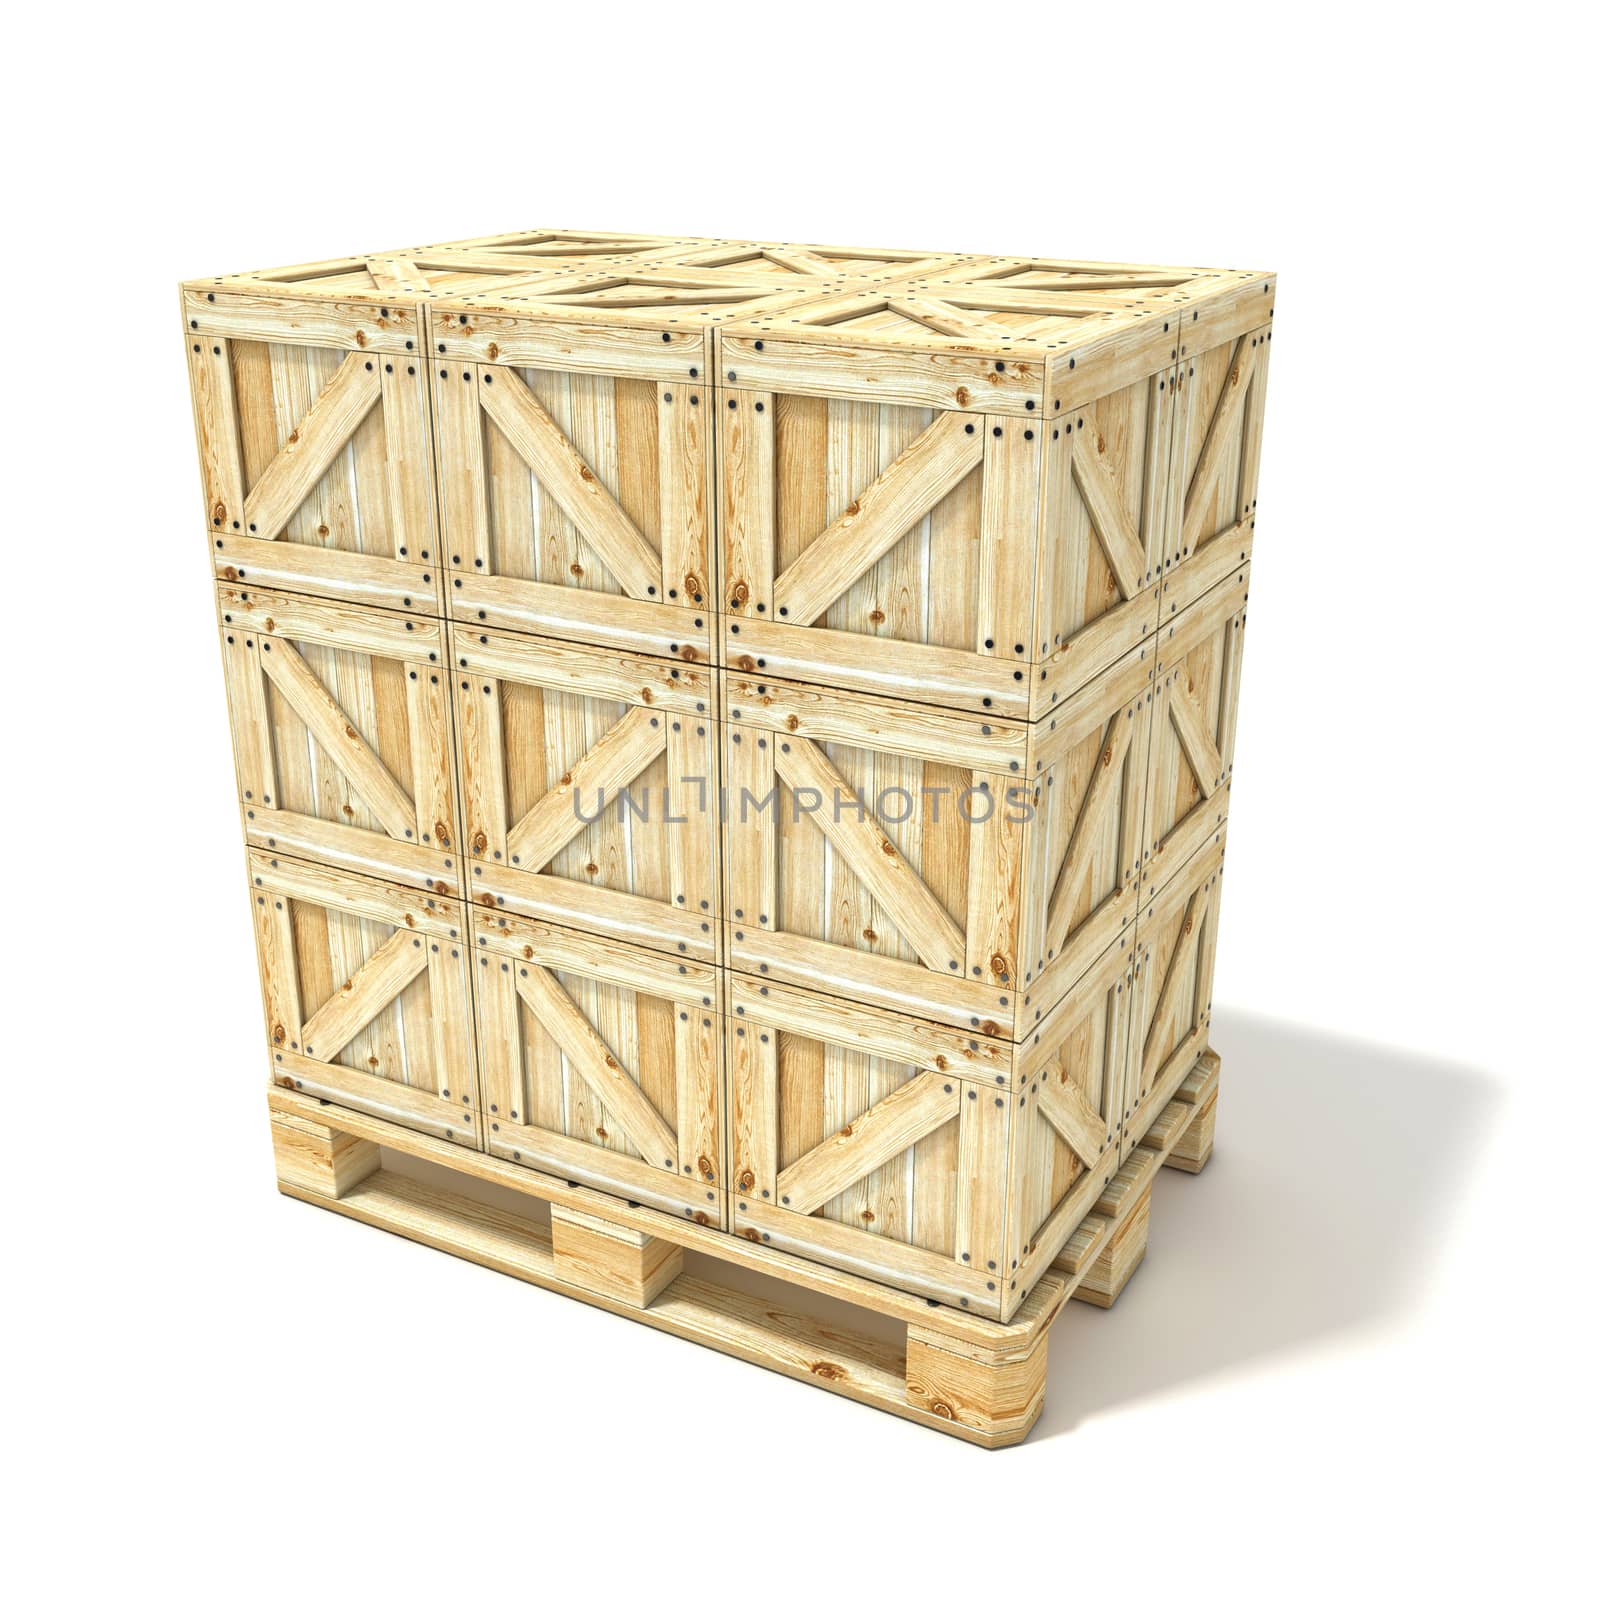 Wooden boxes on euro pallet. 3D render illustration isolated on a white background